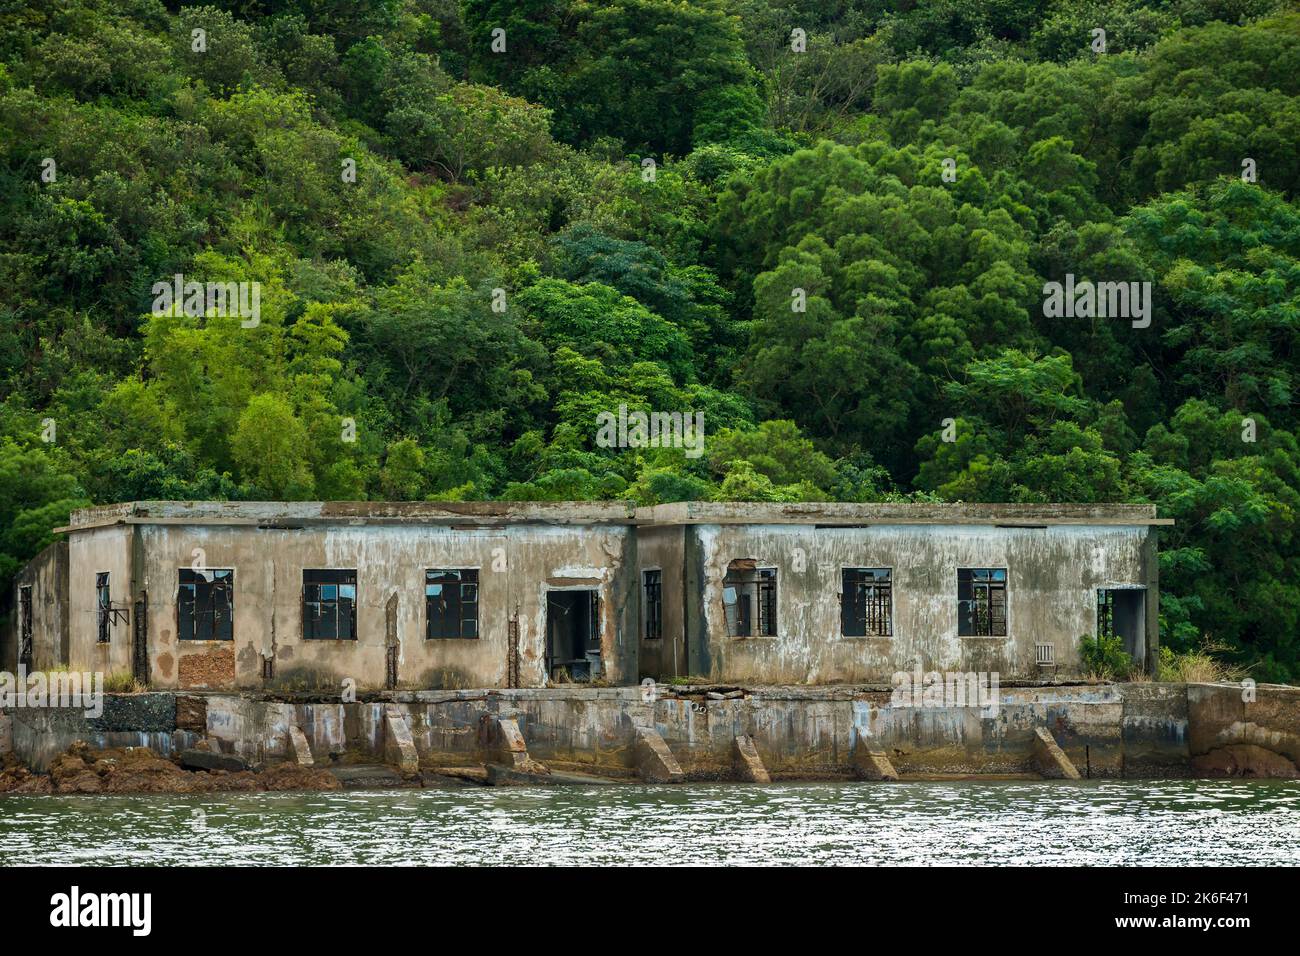 Abandoned buildings of a former pearl oyster farm in Lo Fu Wat, a secluded cove on the northern shore of Tolo Channel, New Territories, Hong Kong Stock Photo